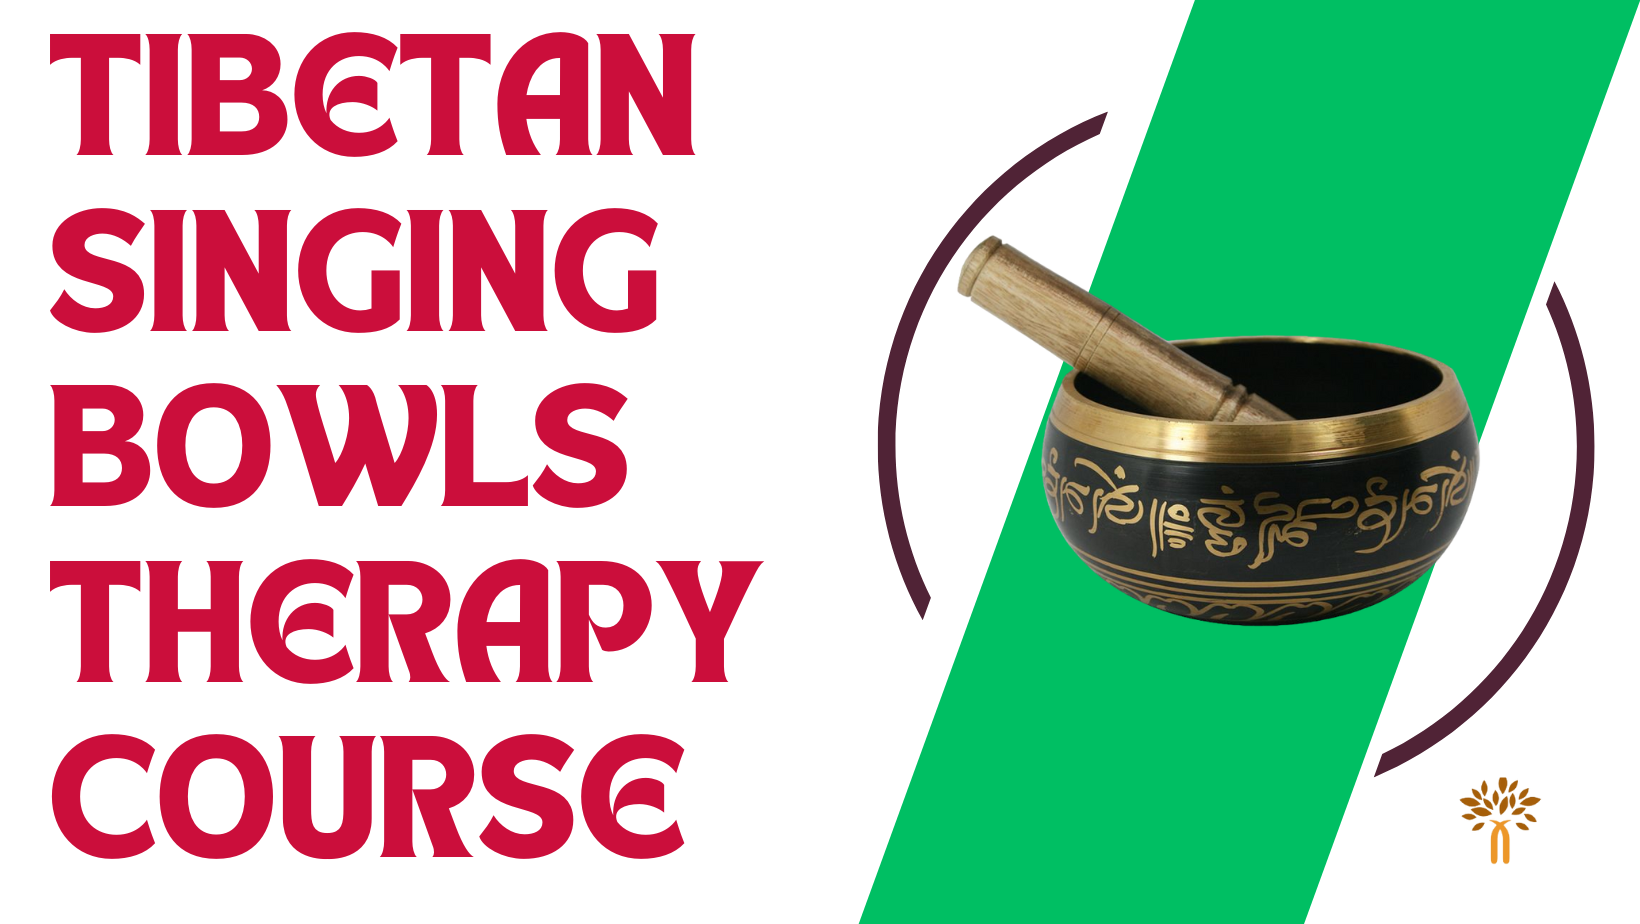 Tibetan Singing Bowls Therapy Courses in Chandigarh